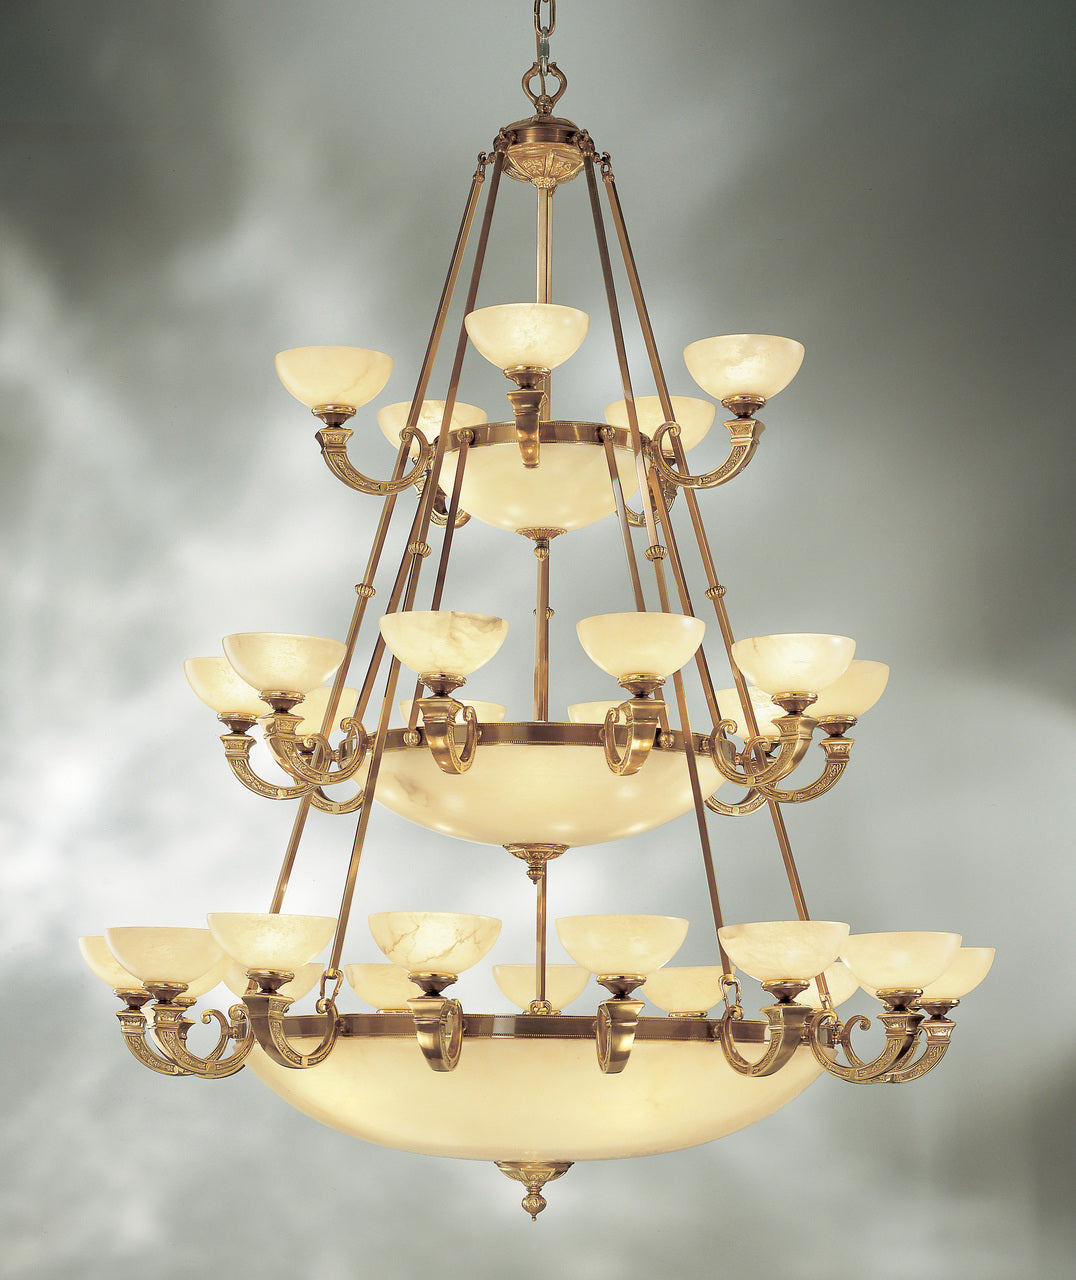 Classic Lighting 5626 ABZ Mallorca Alabaster Chandelier in Antique Bronze (Imported from Spain)